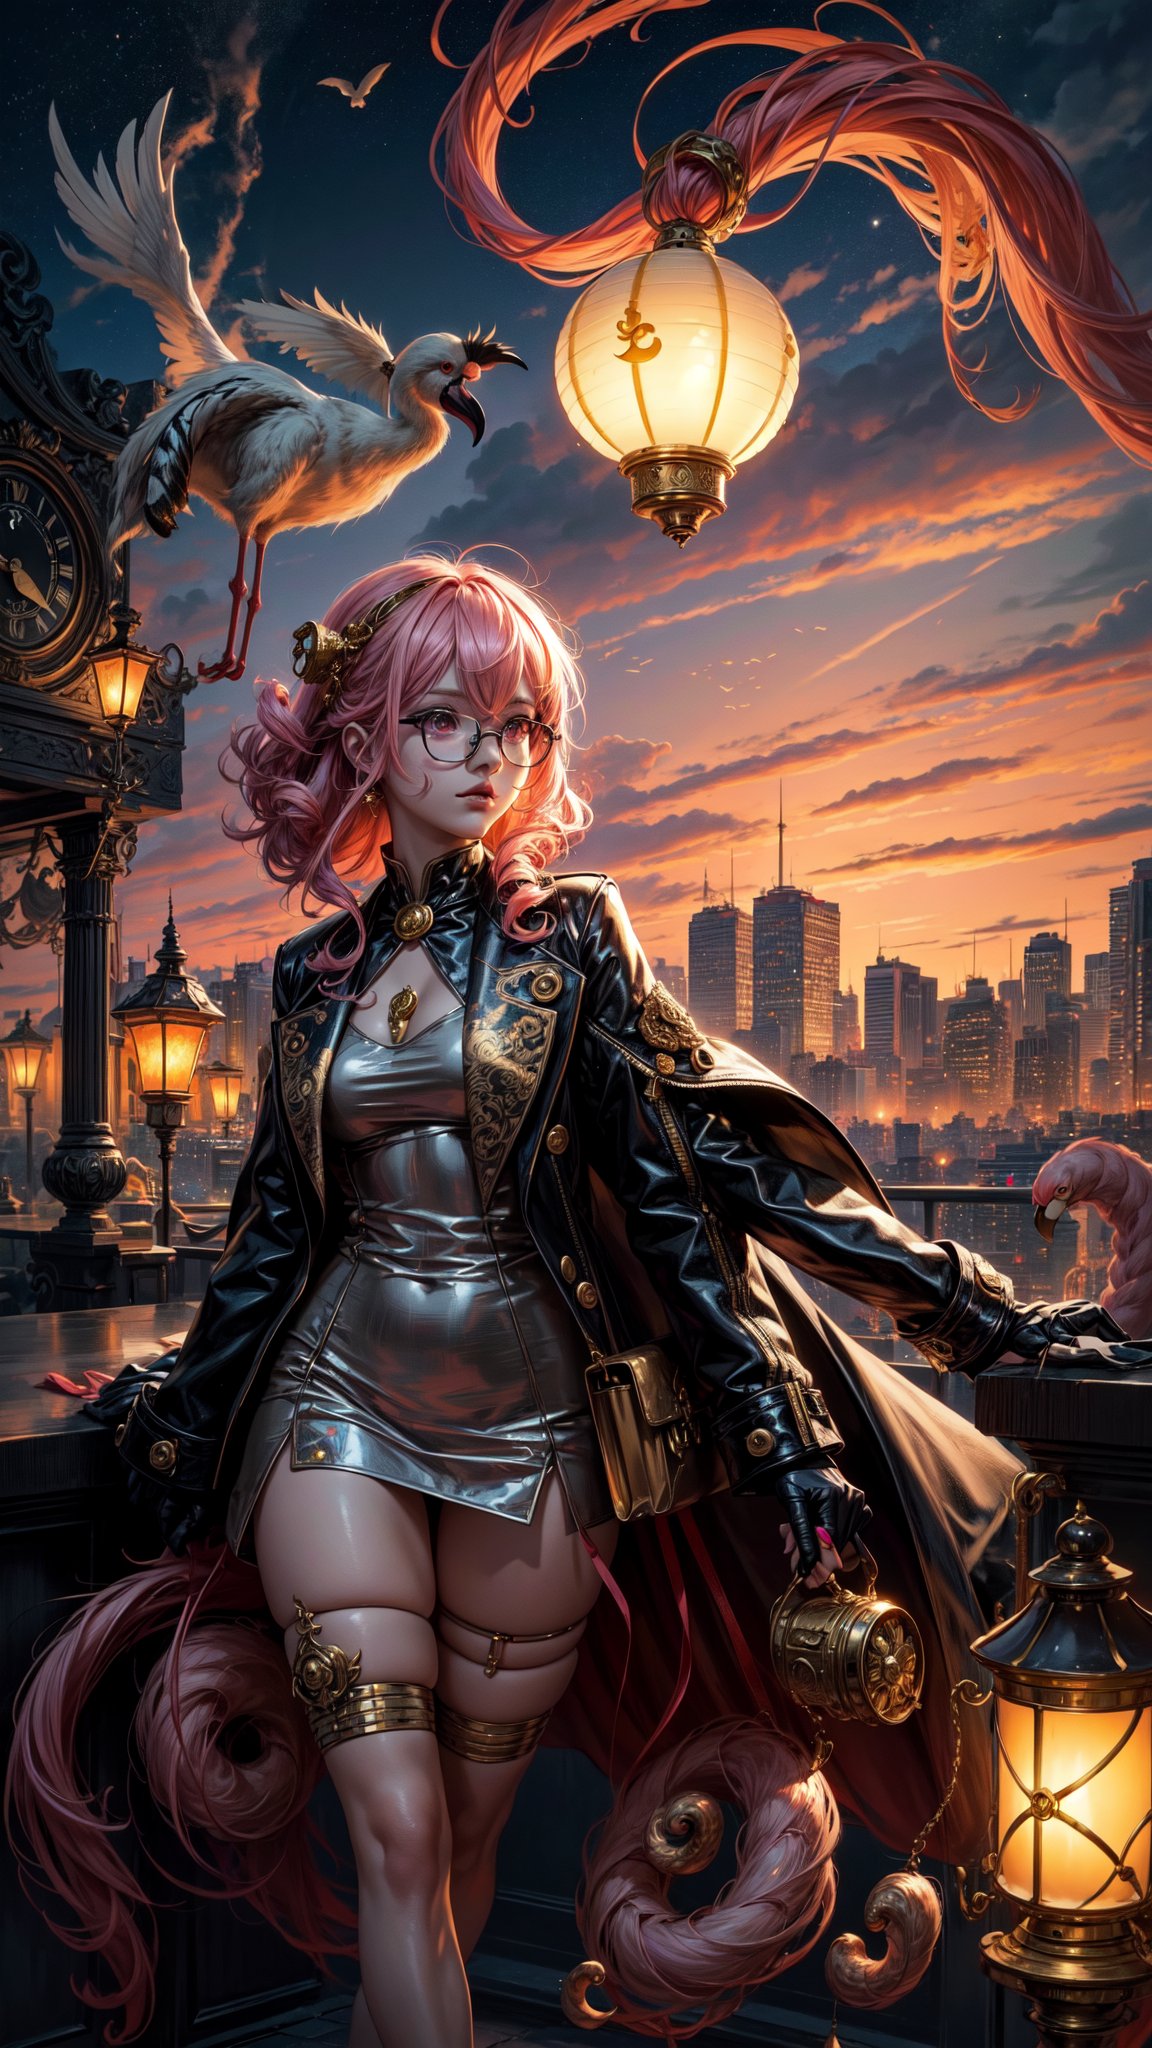 A surrealistic anime landscape unfolds: Salvador Dali's iconic melting clocks and distorted objects blend with vibrant anime colors and stylized characters. In a dreamlike setting, a bespectacled anime girl with a wispy mustache and curly hair peers out from behind a warped clock face, surrounded by swirling clouds of golden smoke. The cityscape in the background features buildings shaped like snails and mushrooms, while a giant, flamingo-pink cat watches over the scene, its eyes glowing like lanterns.